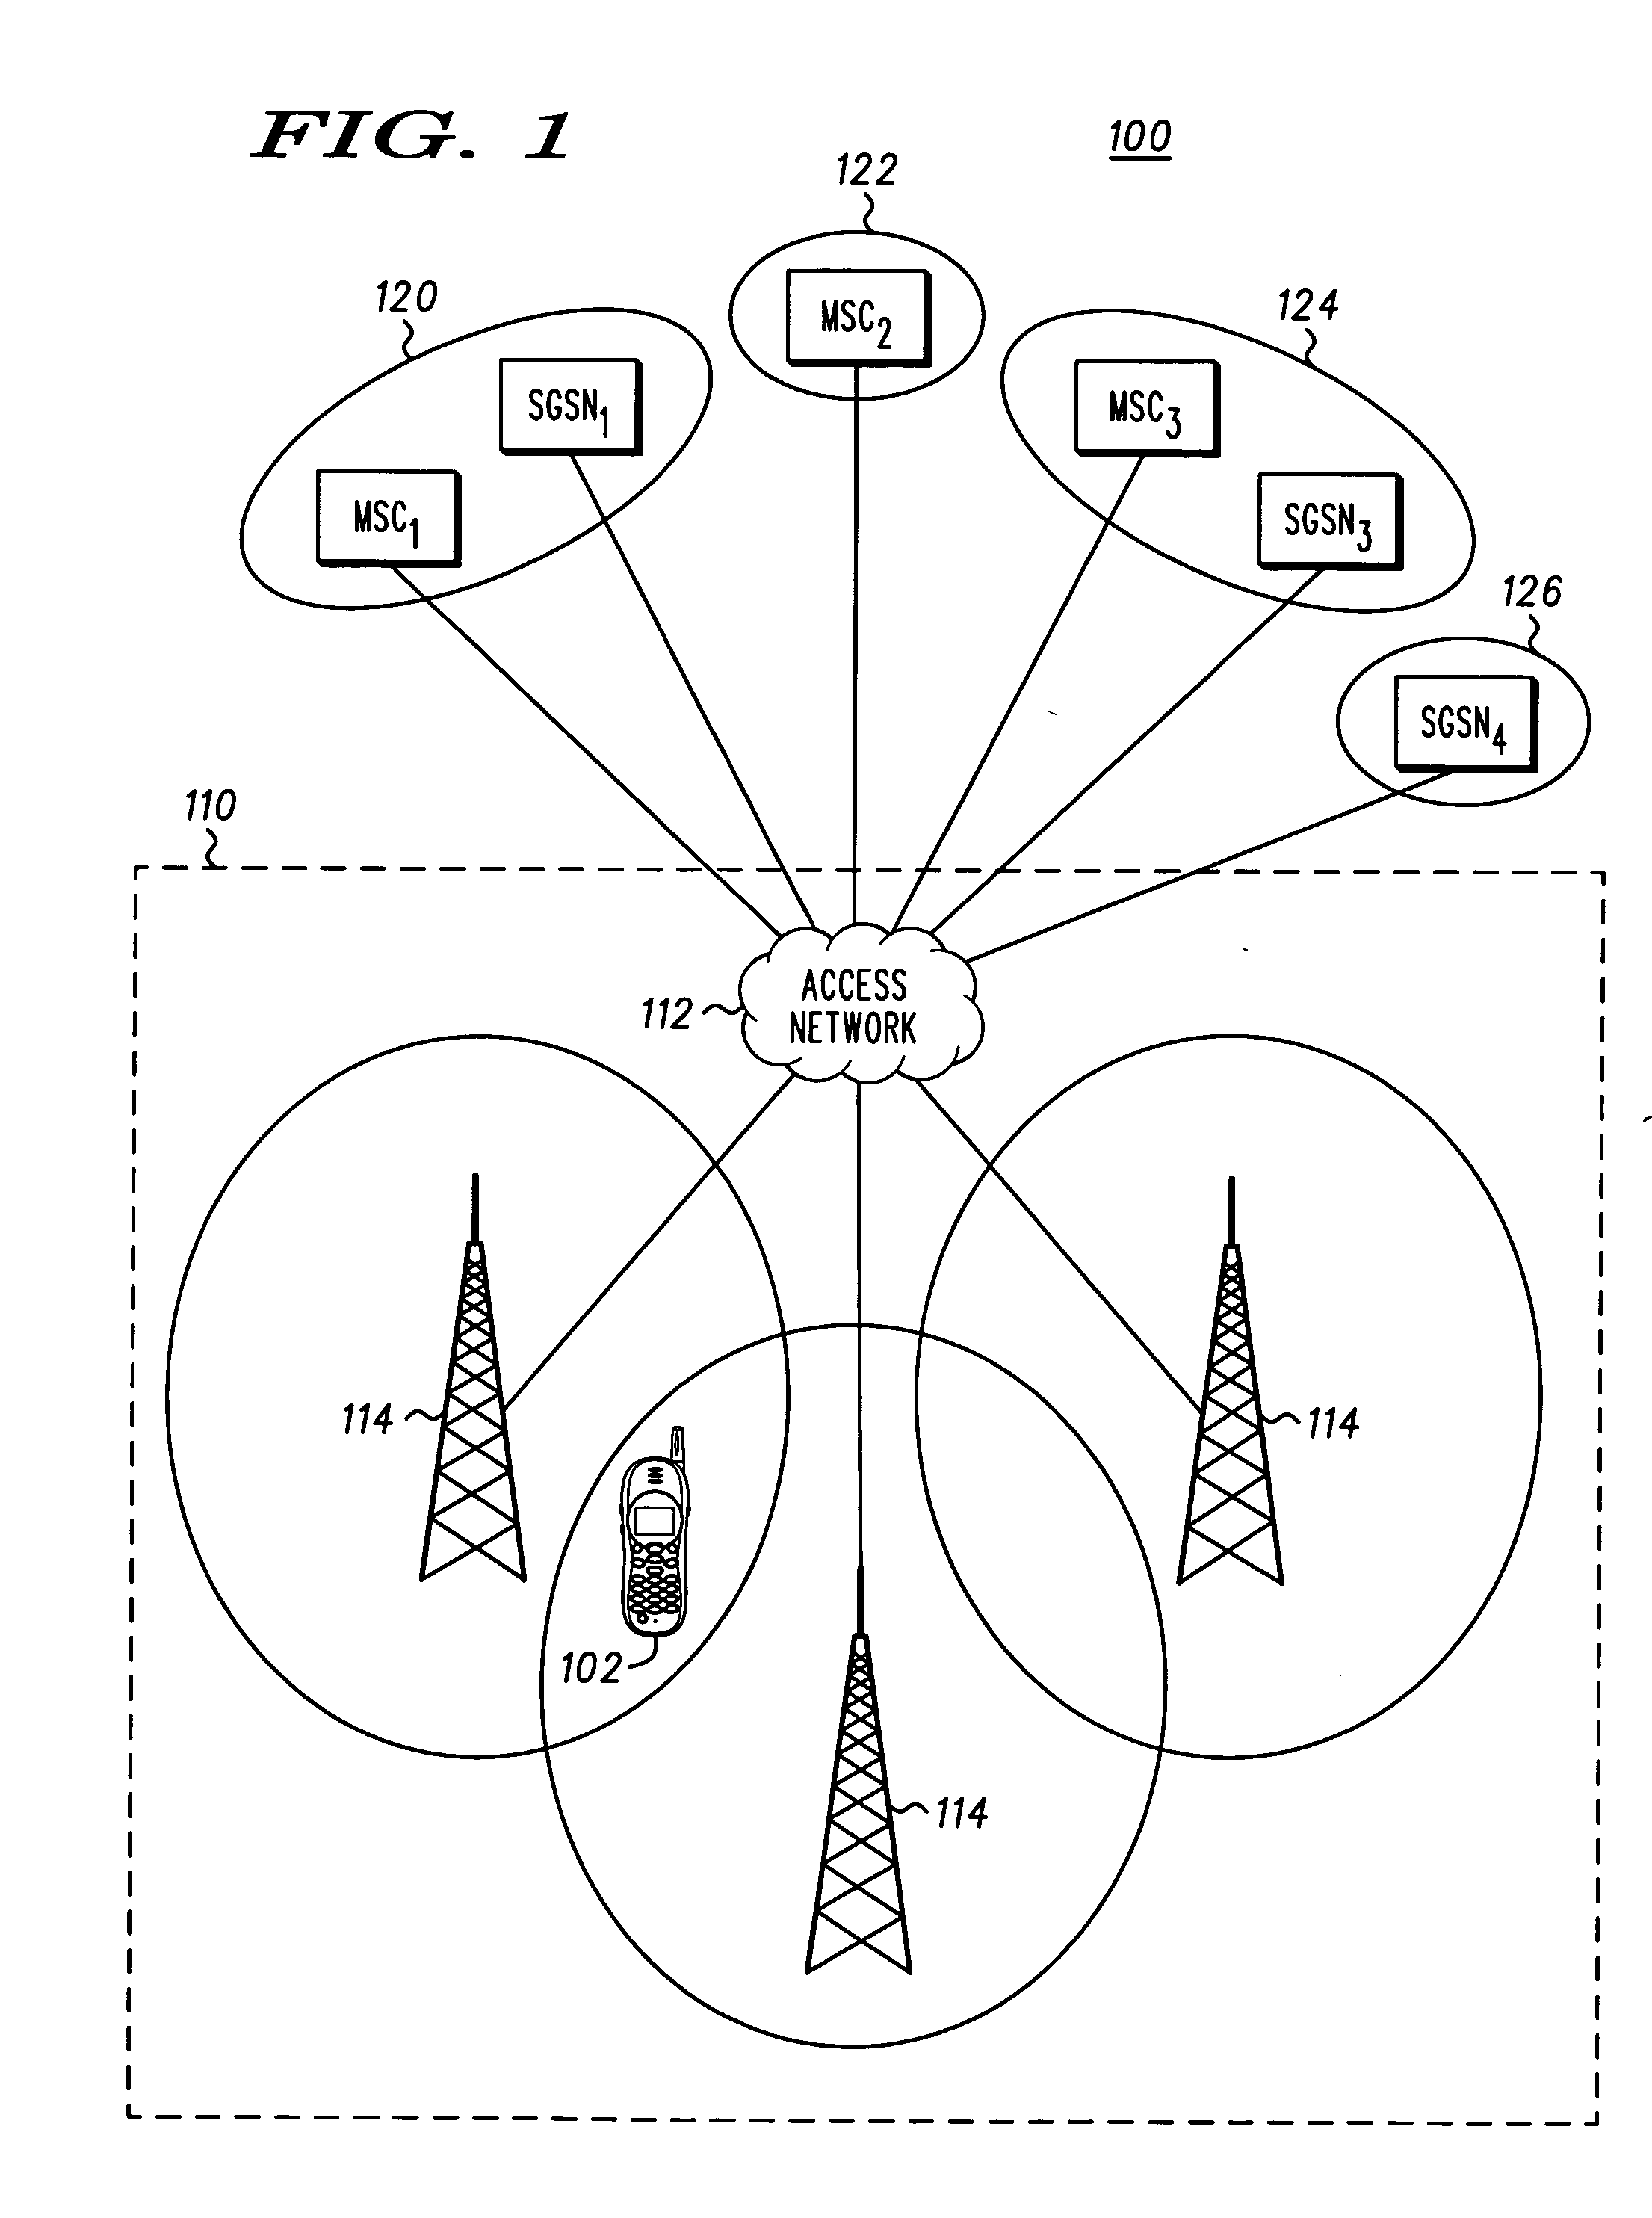 Wireless access network sharing among core networks and methods